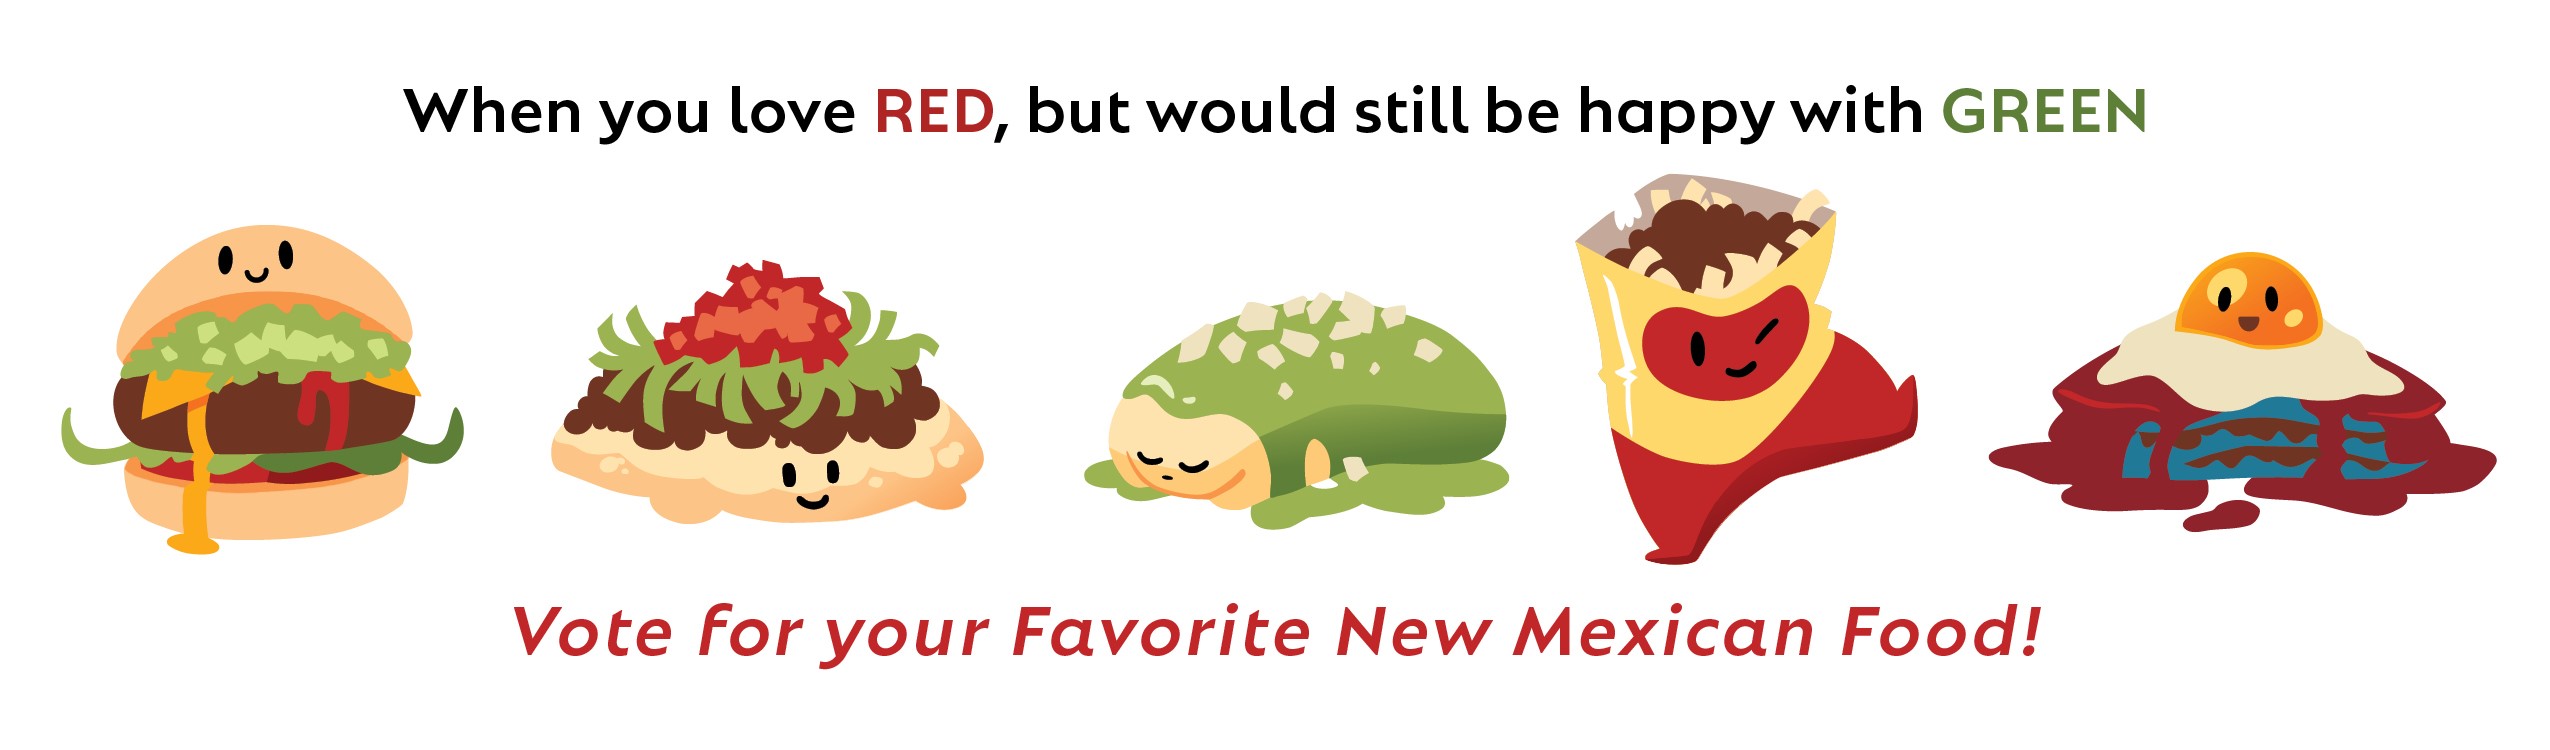 Vote for your Favorite New Mexican Food